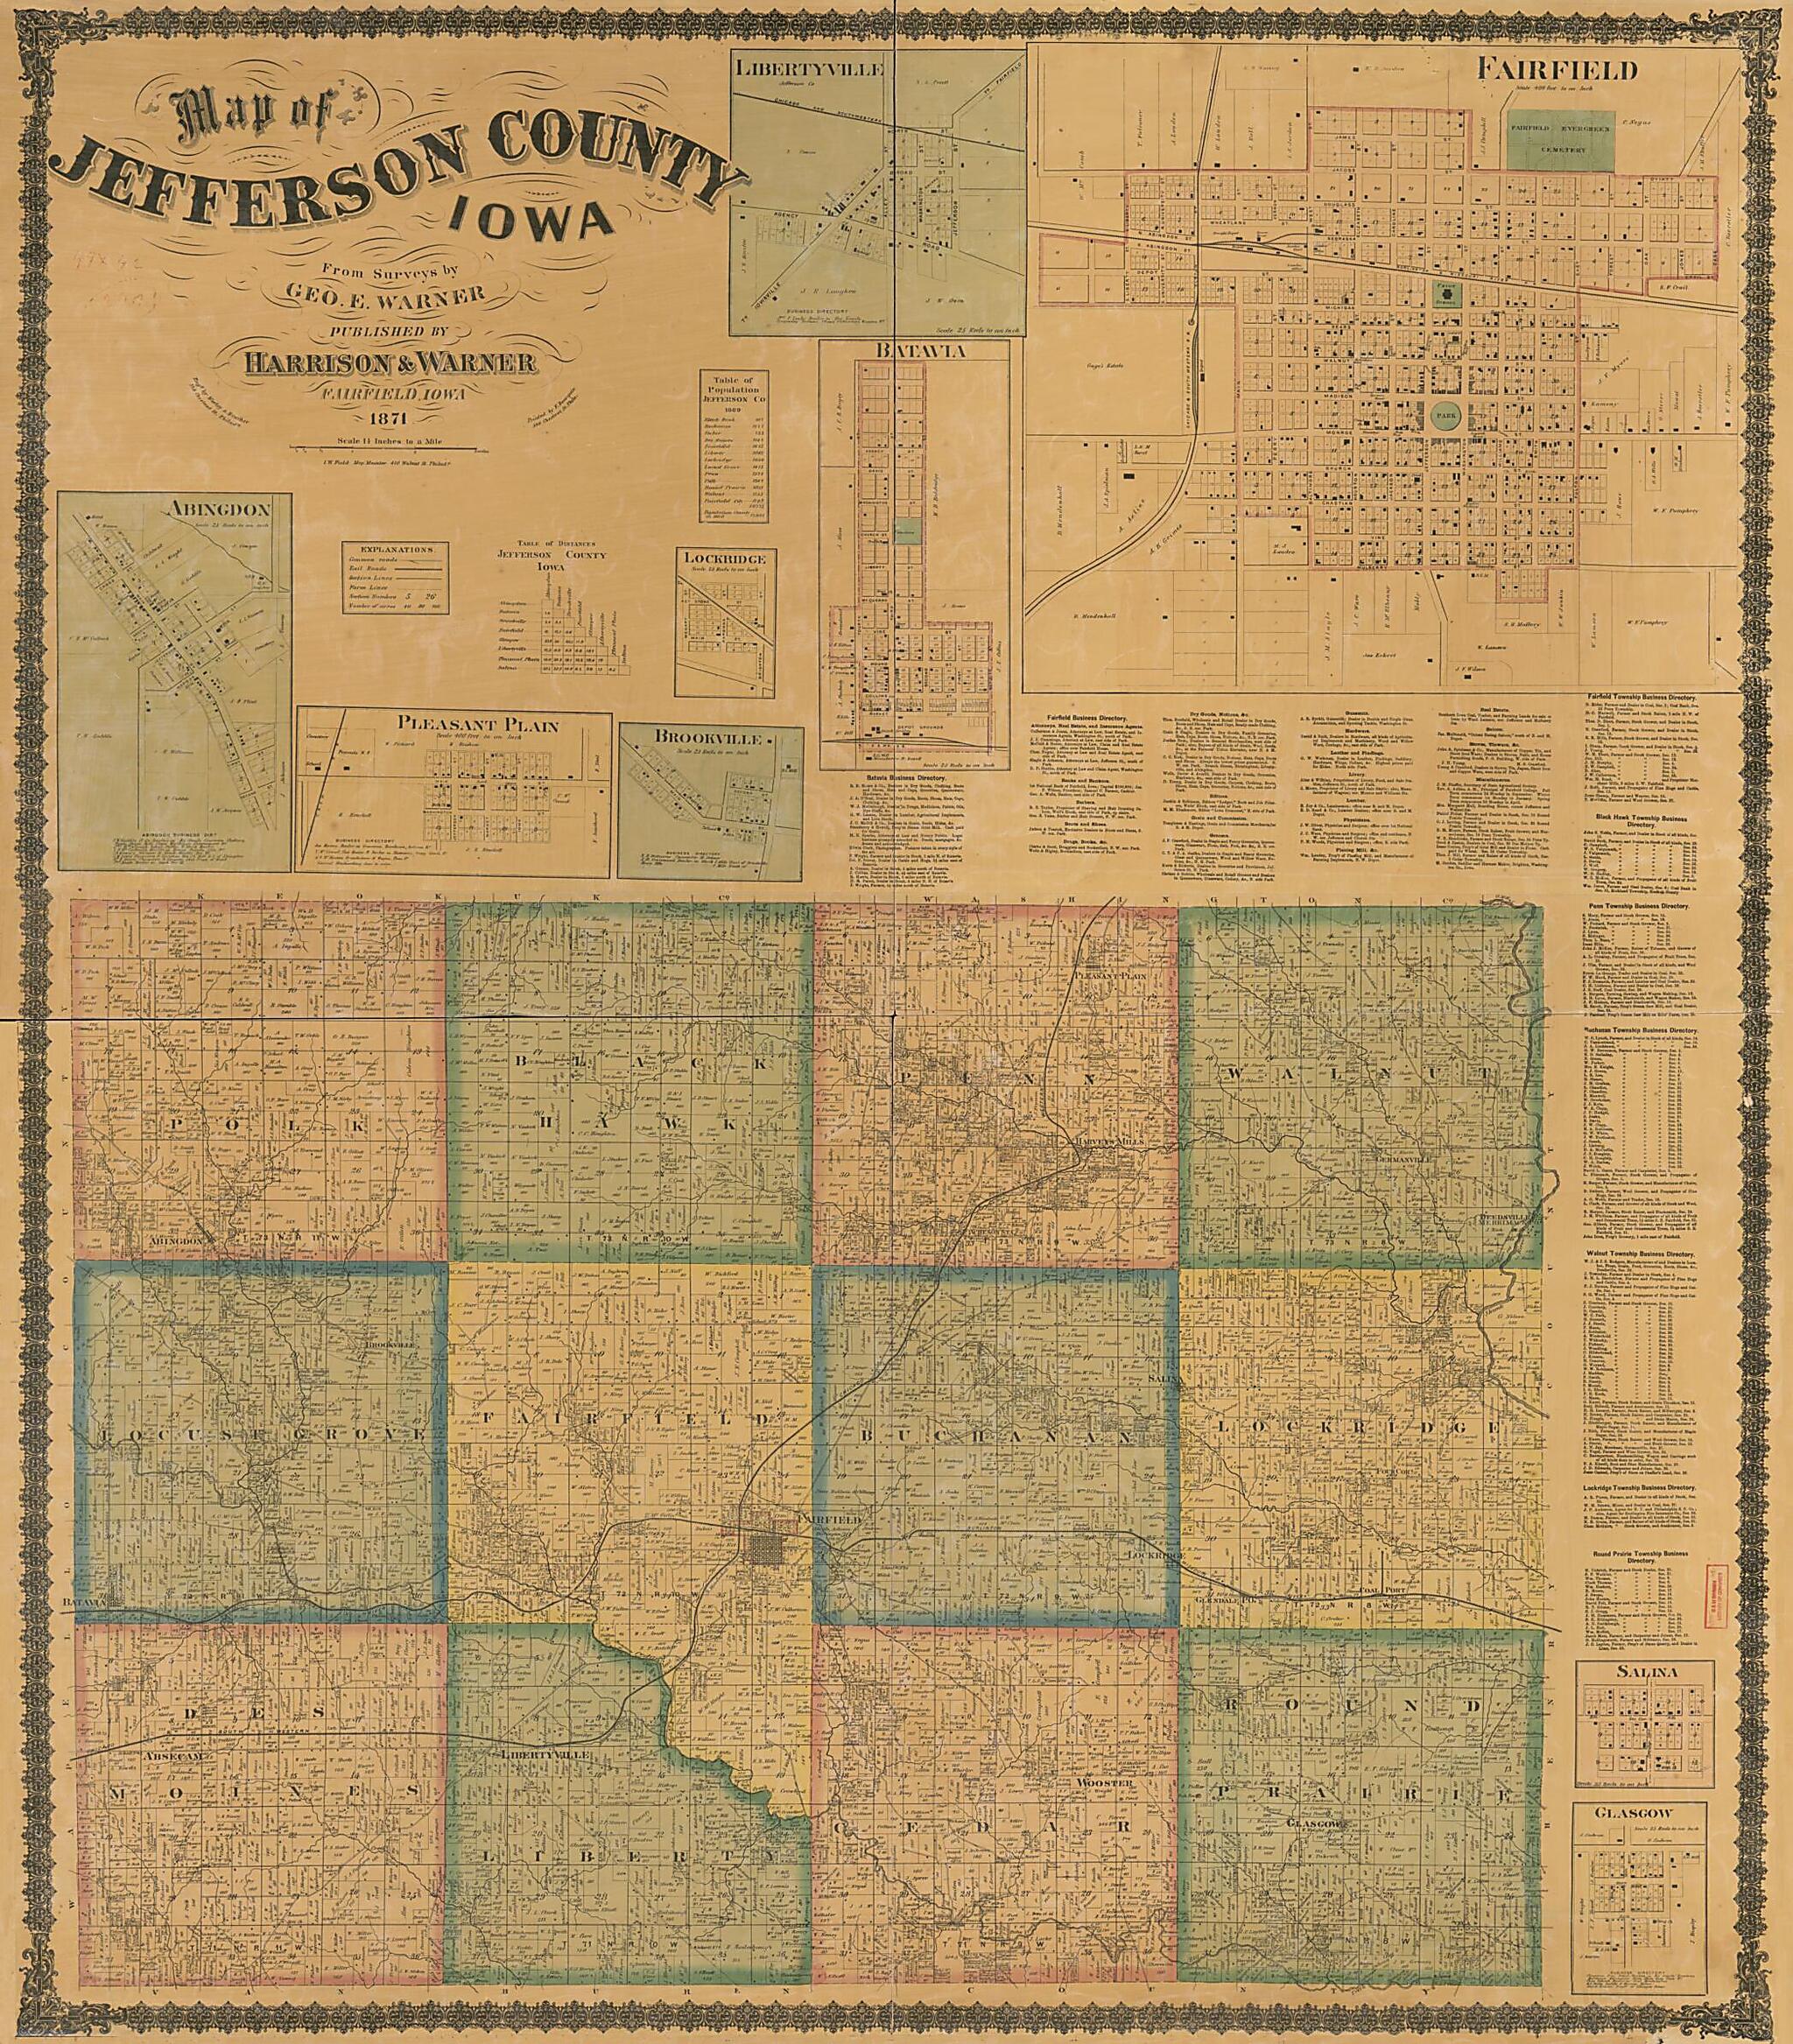 This old map of Map of Jefferson County, Iowa from 1871 was created by George E. Warner,  Worley &amp; Bracher in 1871